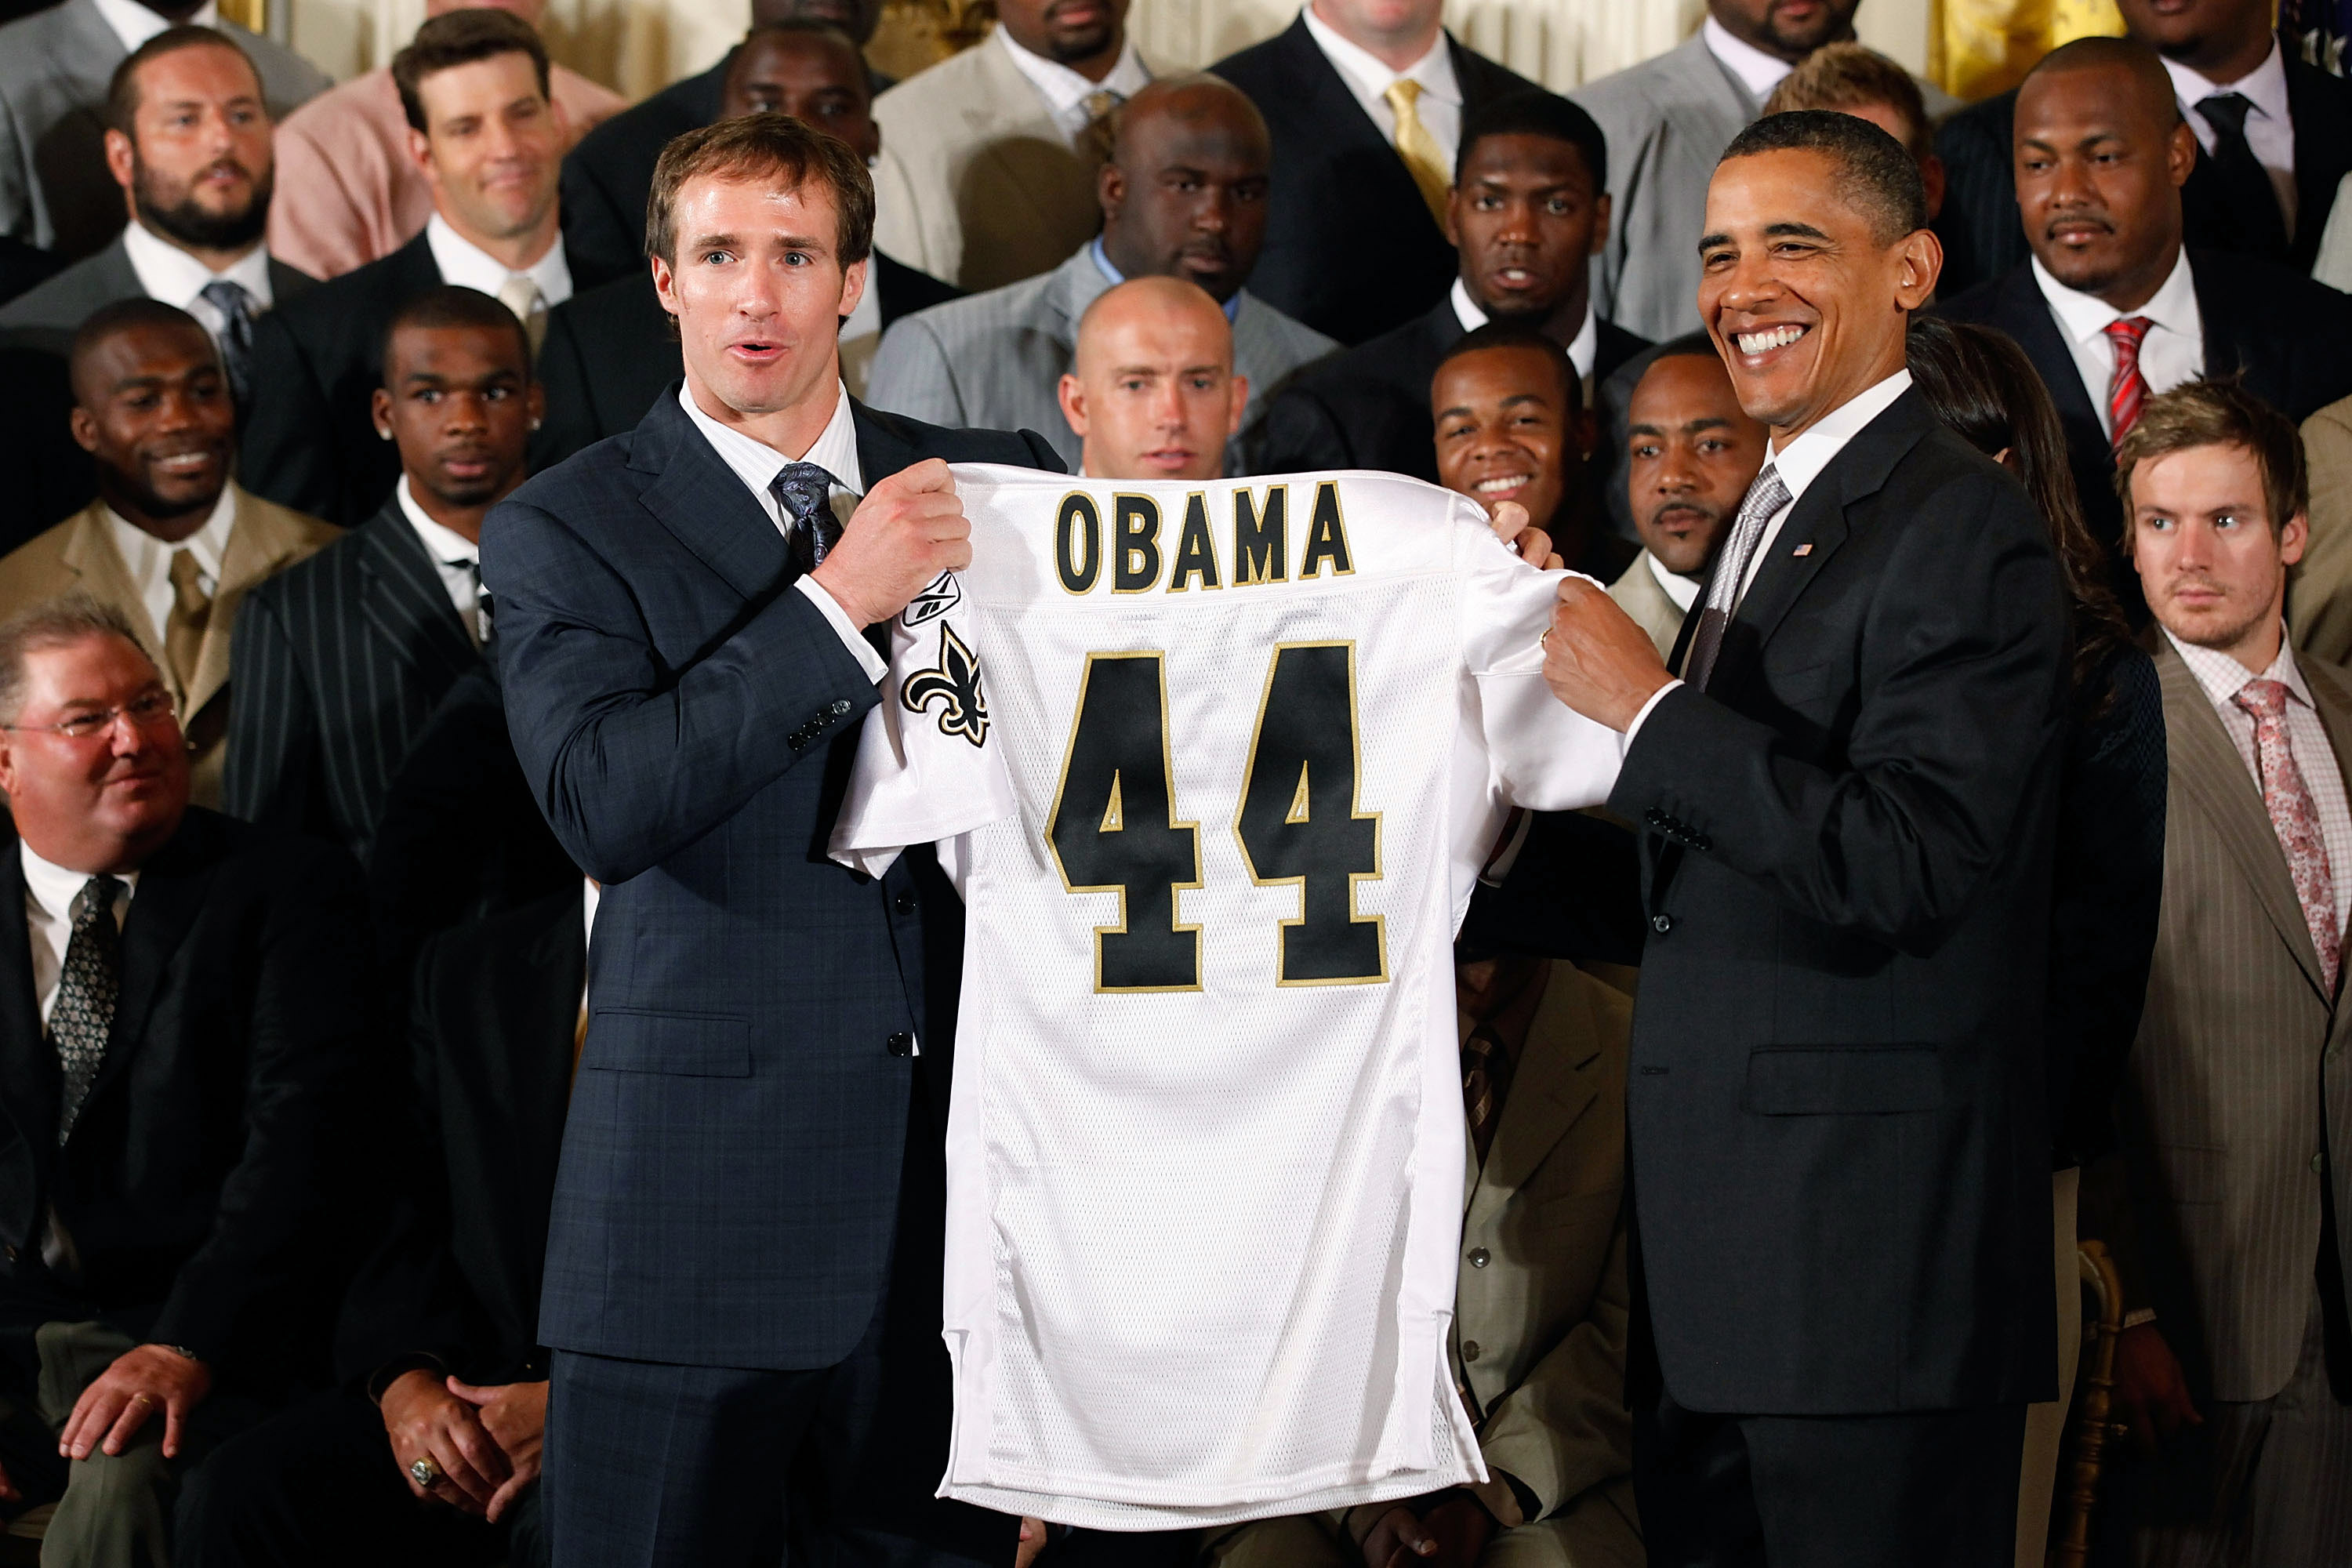 WASHINGTON - AUGUST 09:  New Orleans Saints quarterback and National Football League MVP Drew Brees (L) presents U.S. President Barack Obama (R) with a Saints jersey during a reception for the 2010 National Football League Super Bowl champions at the Whit